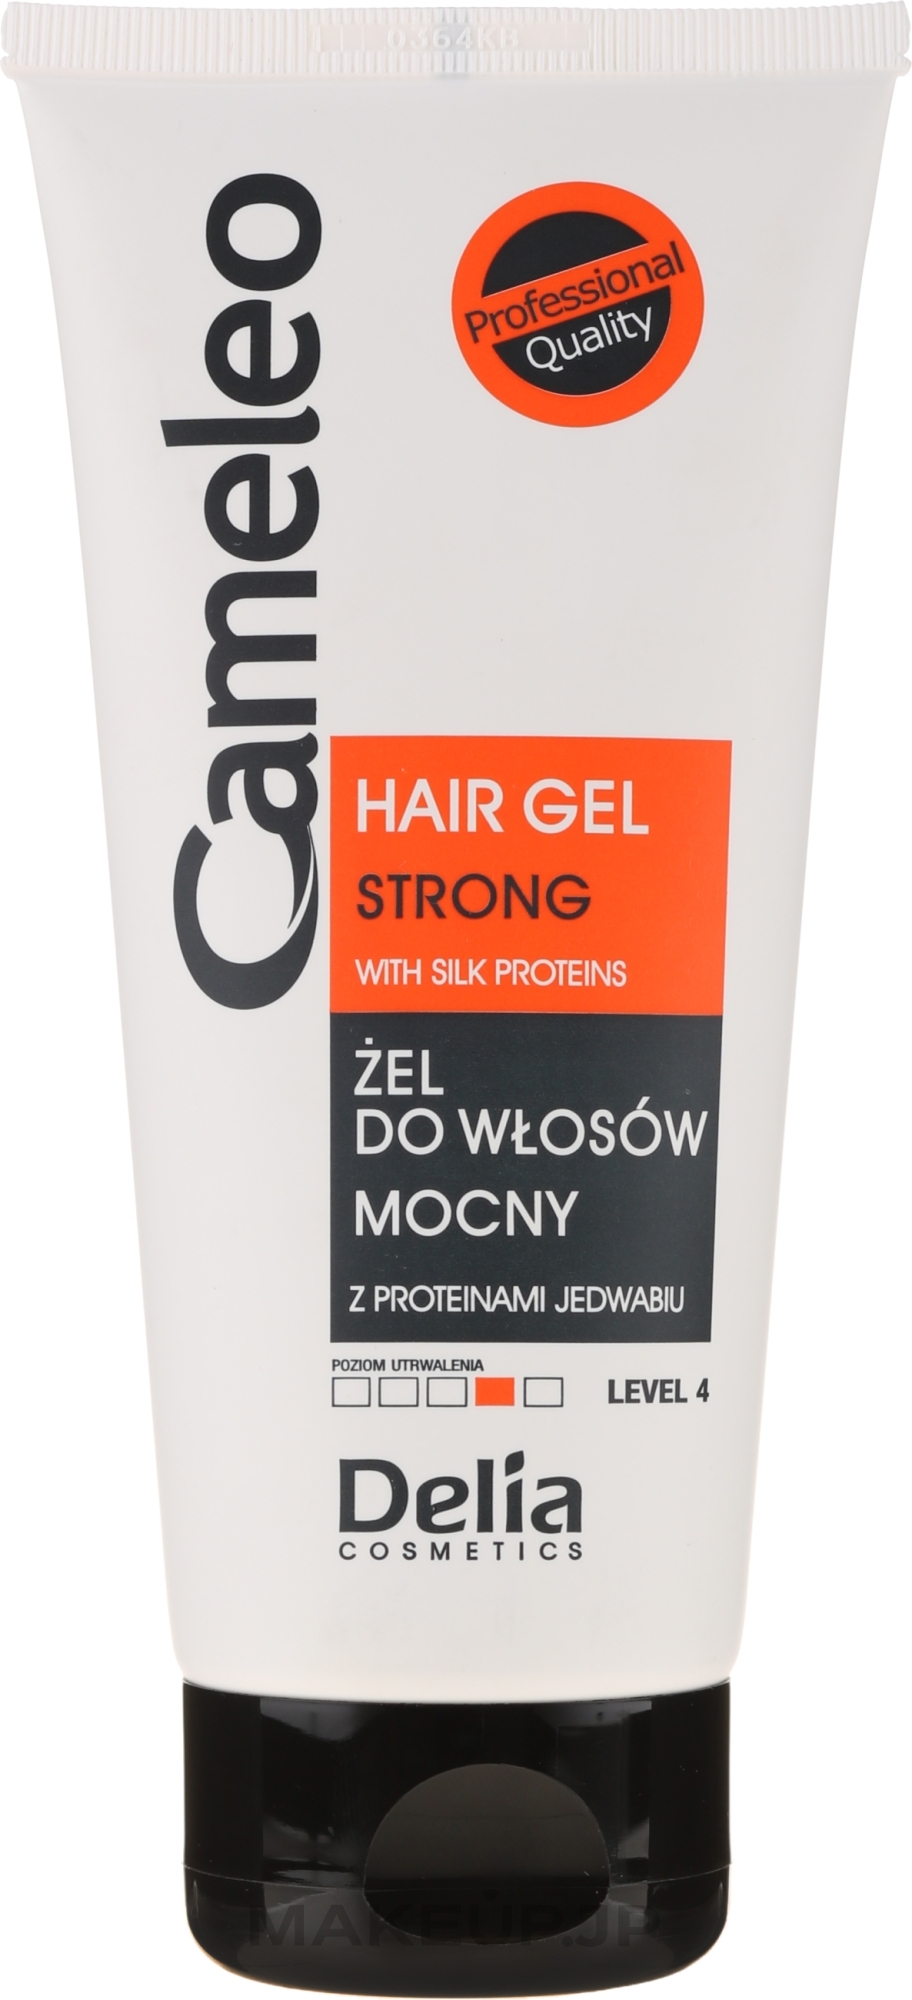 Strong Hold Hair Gel - Delia Cosmetics Cameleo Hair Gel Strong — photo 200 ml